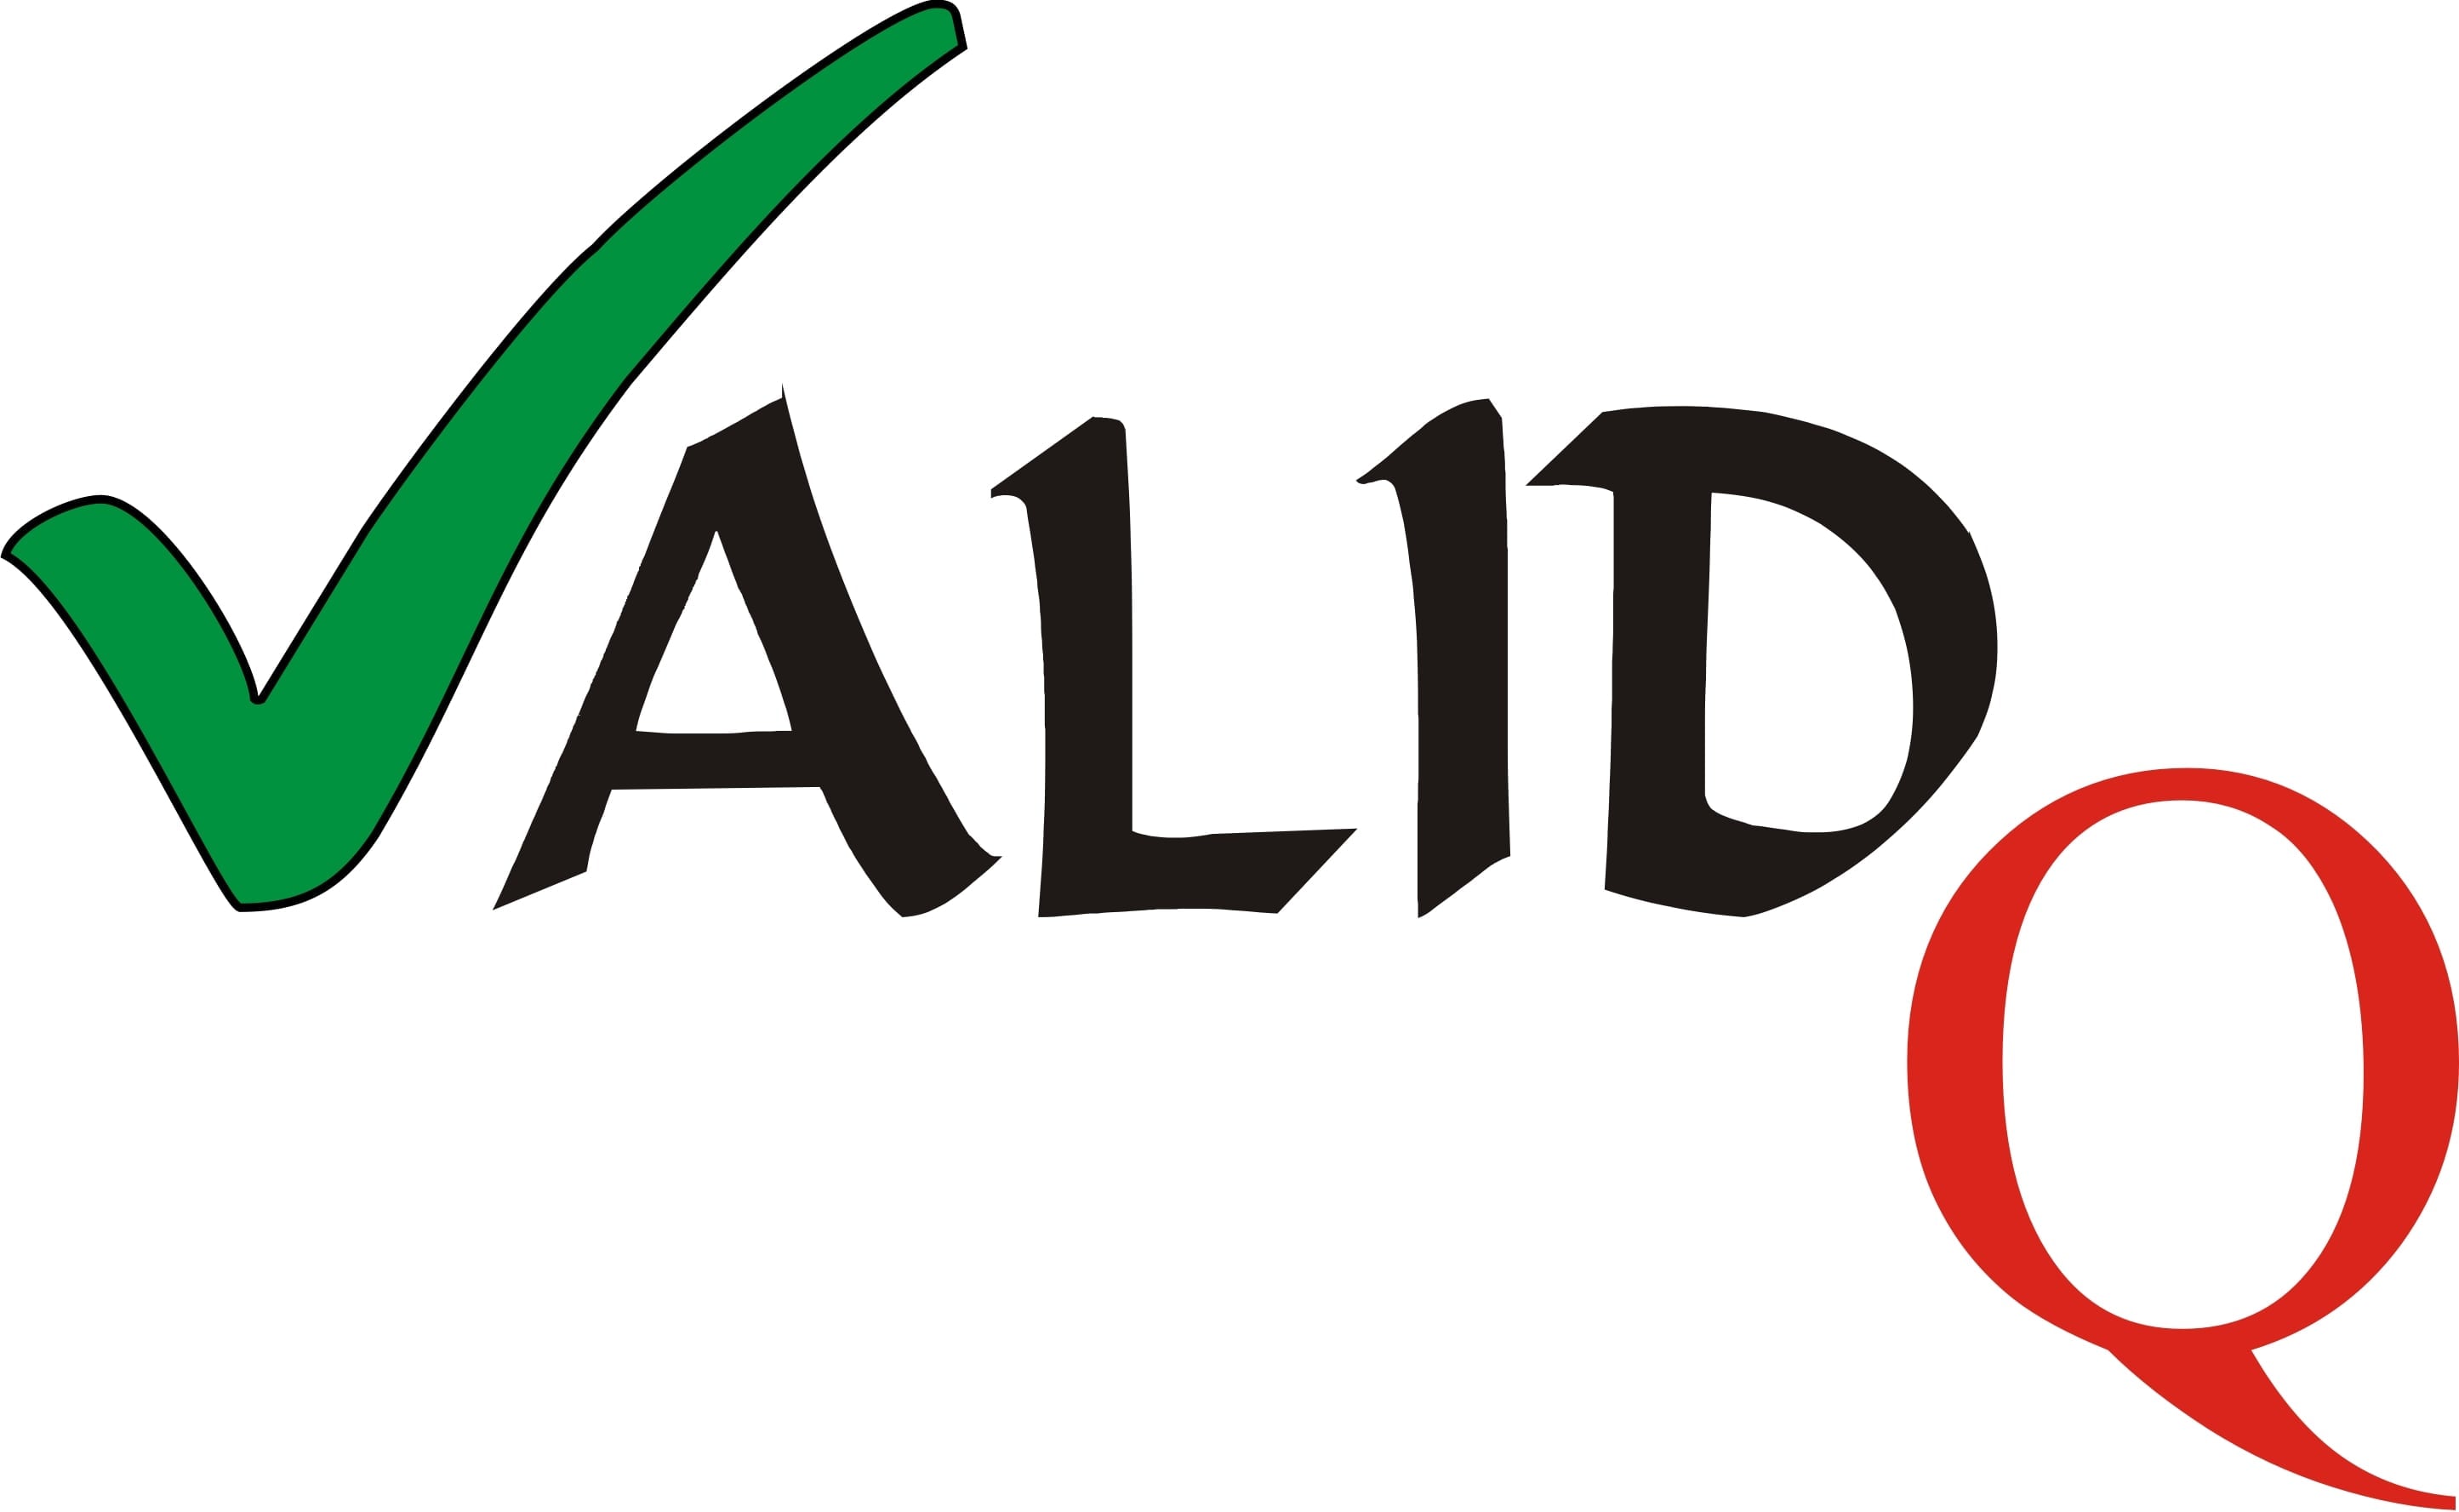 White, red and green are the colors of the Italian flag but also of our ValidQ quality brand